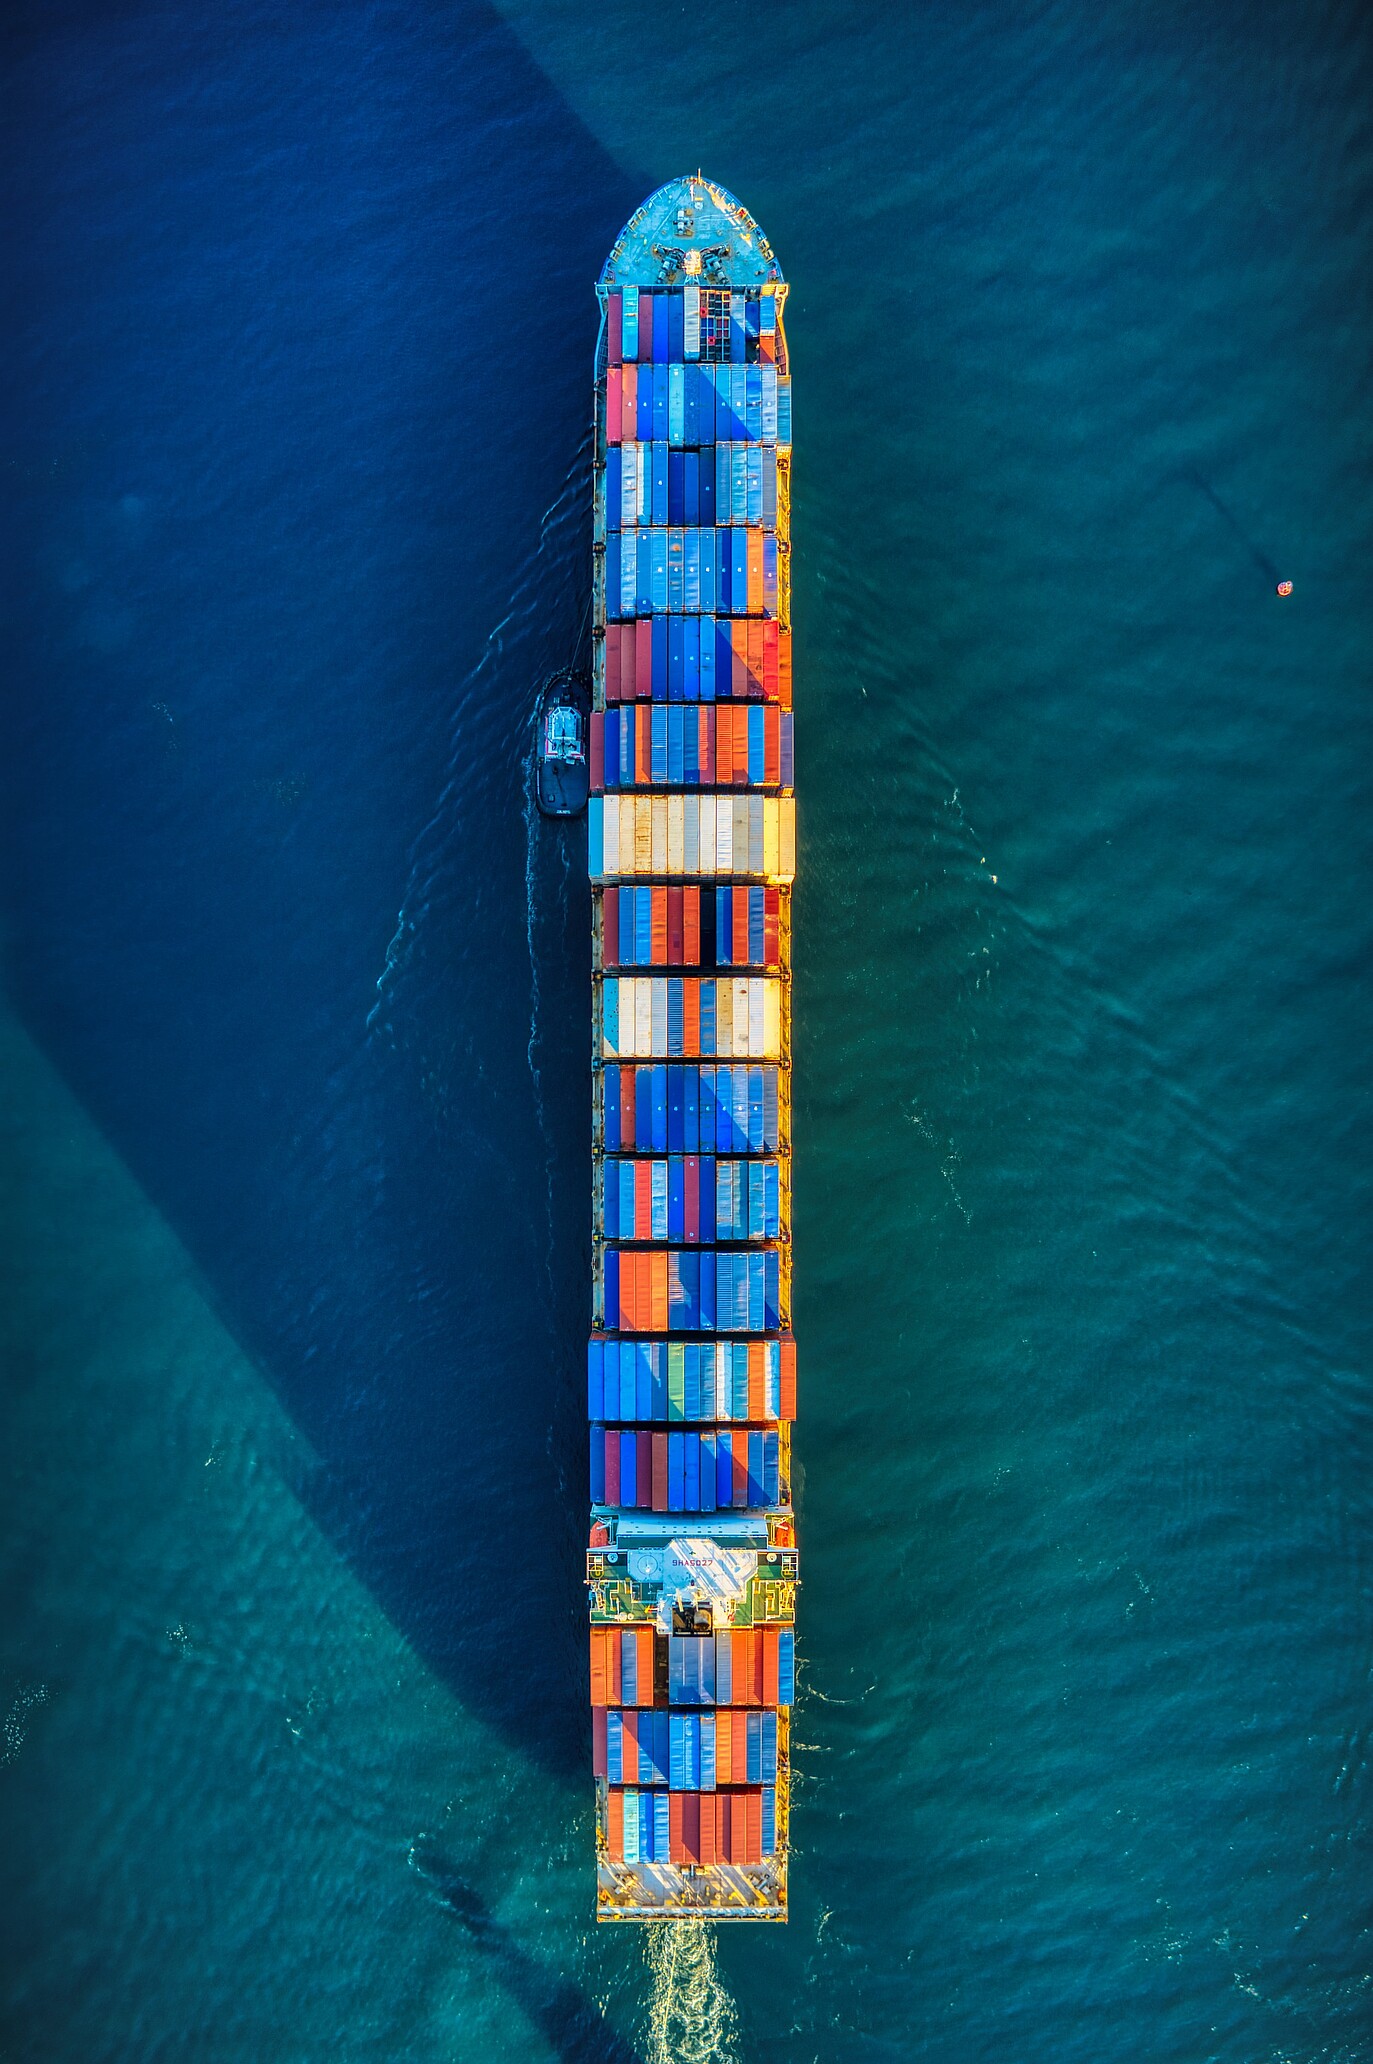 A photo shows a cargo containership in the sea or ocean